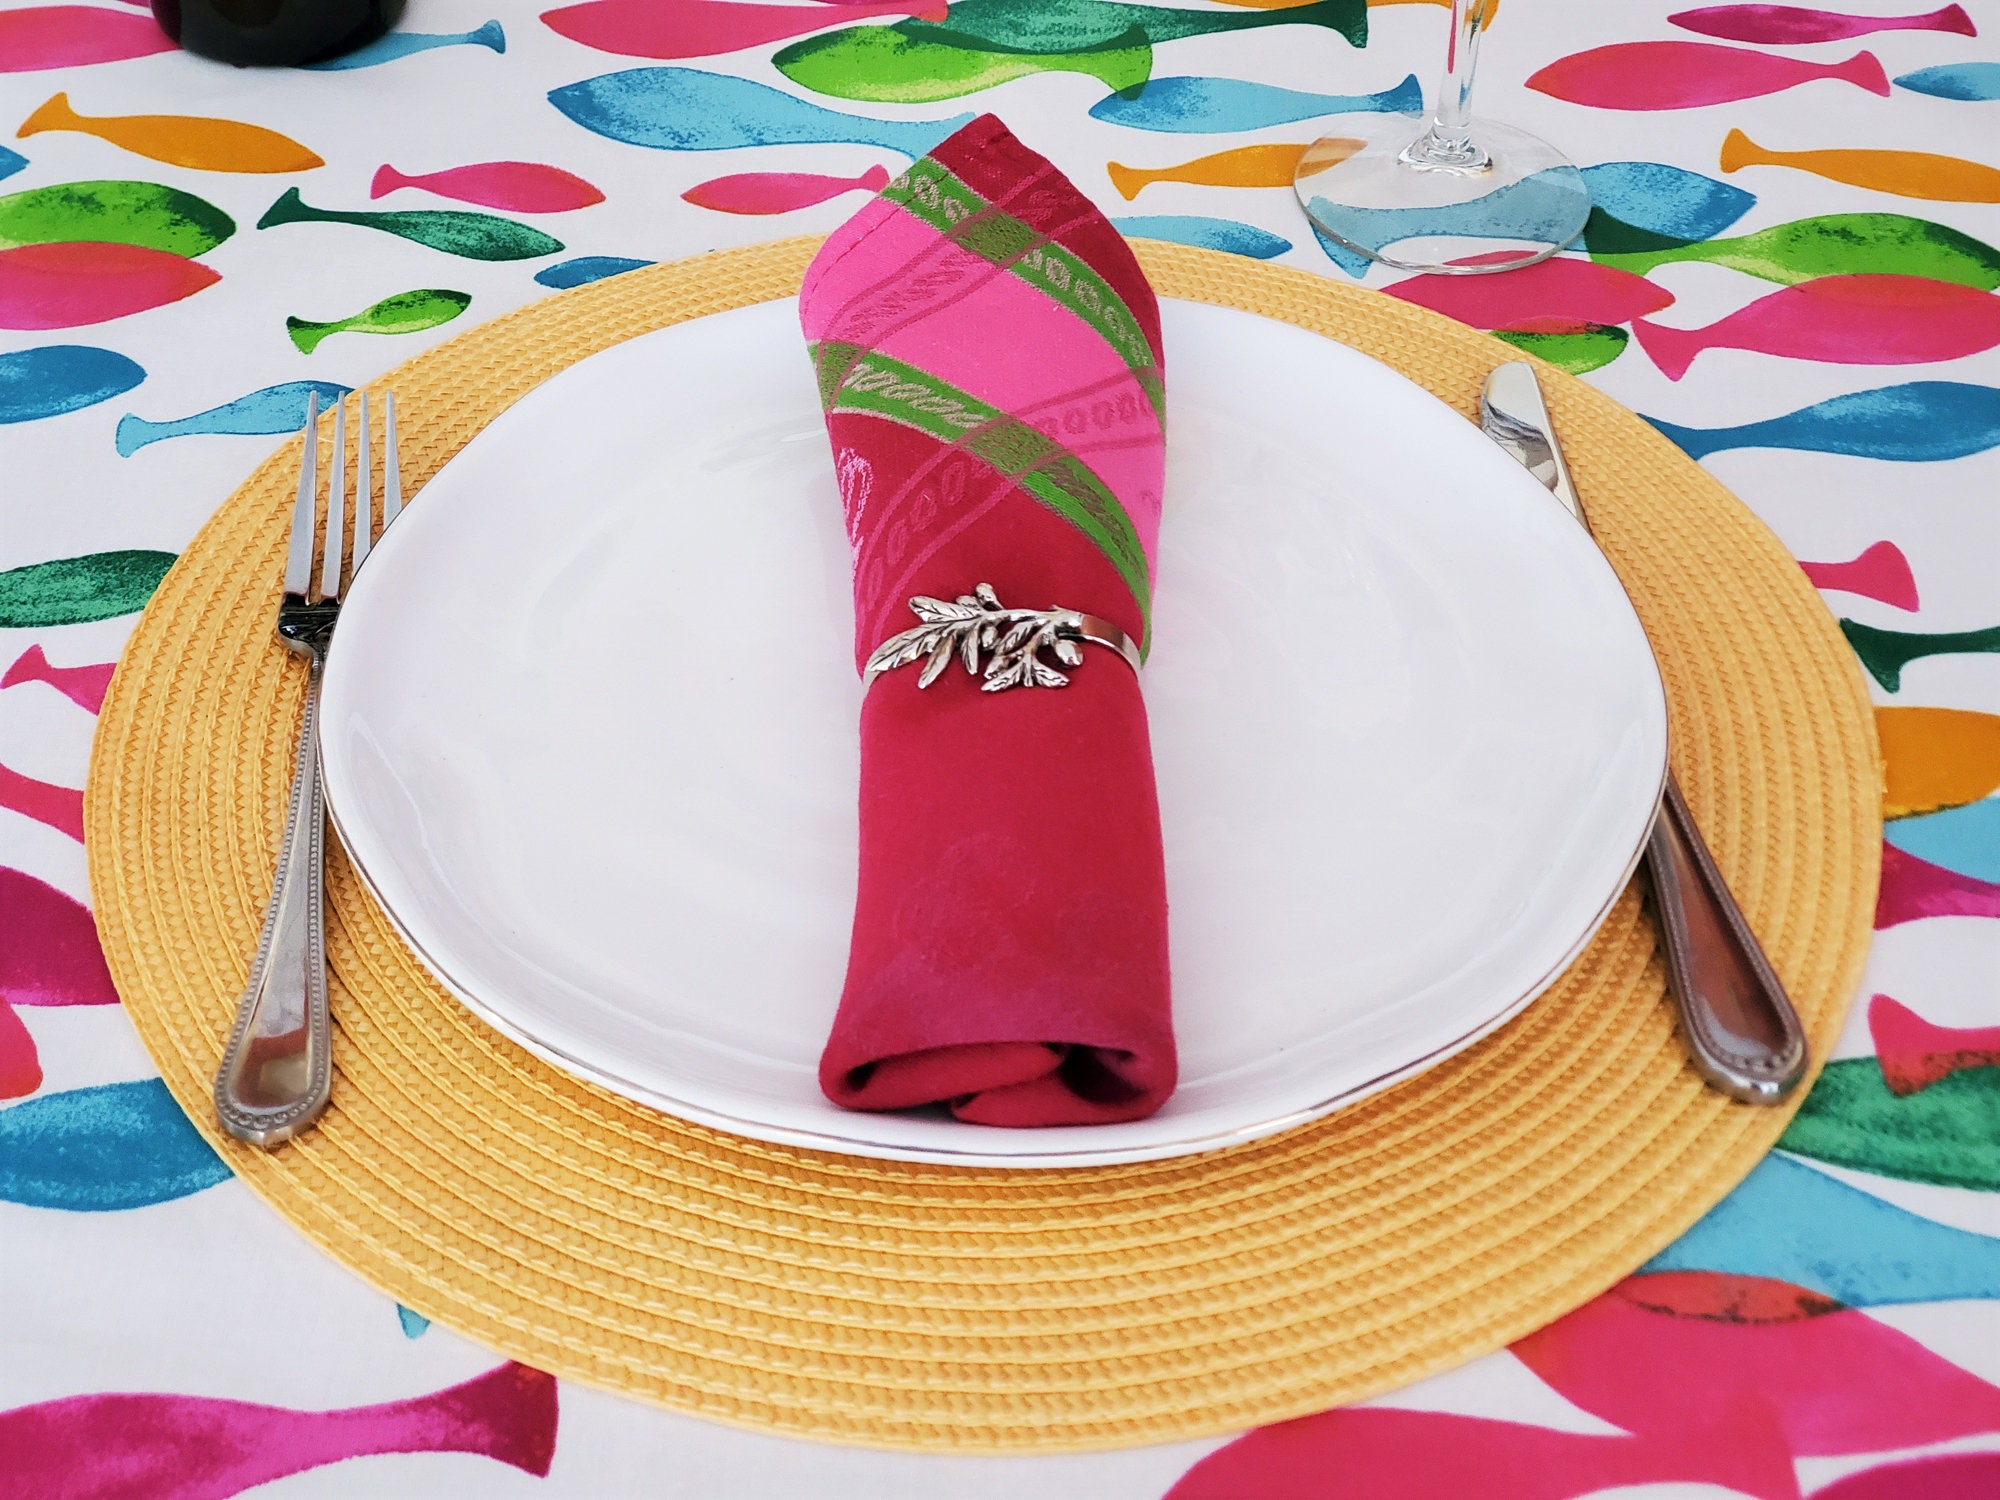 60 OCEAN FISH RAINBOW Round Cotton Coated Tablecloths French Oil Cloth  Spill Wipe off Party Circular Cloth Nature Fish Beach Home Decor -   Canada